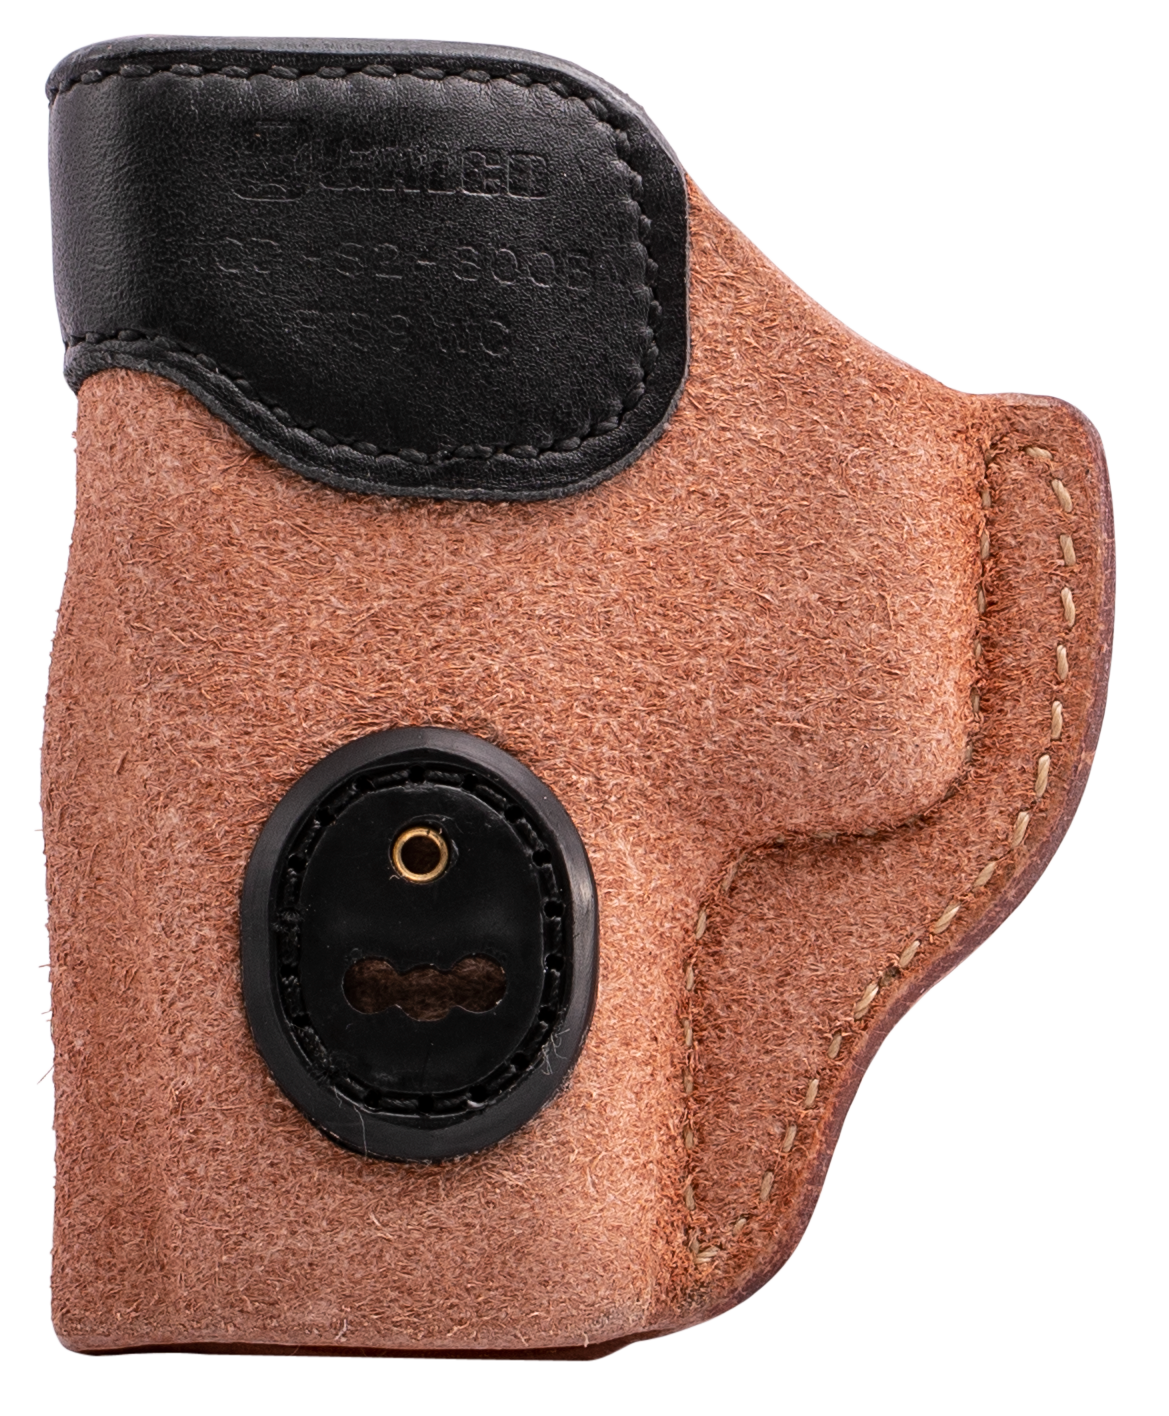 Galco Scout 3.0 IWB Holster - GLOCK 43